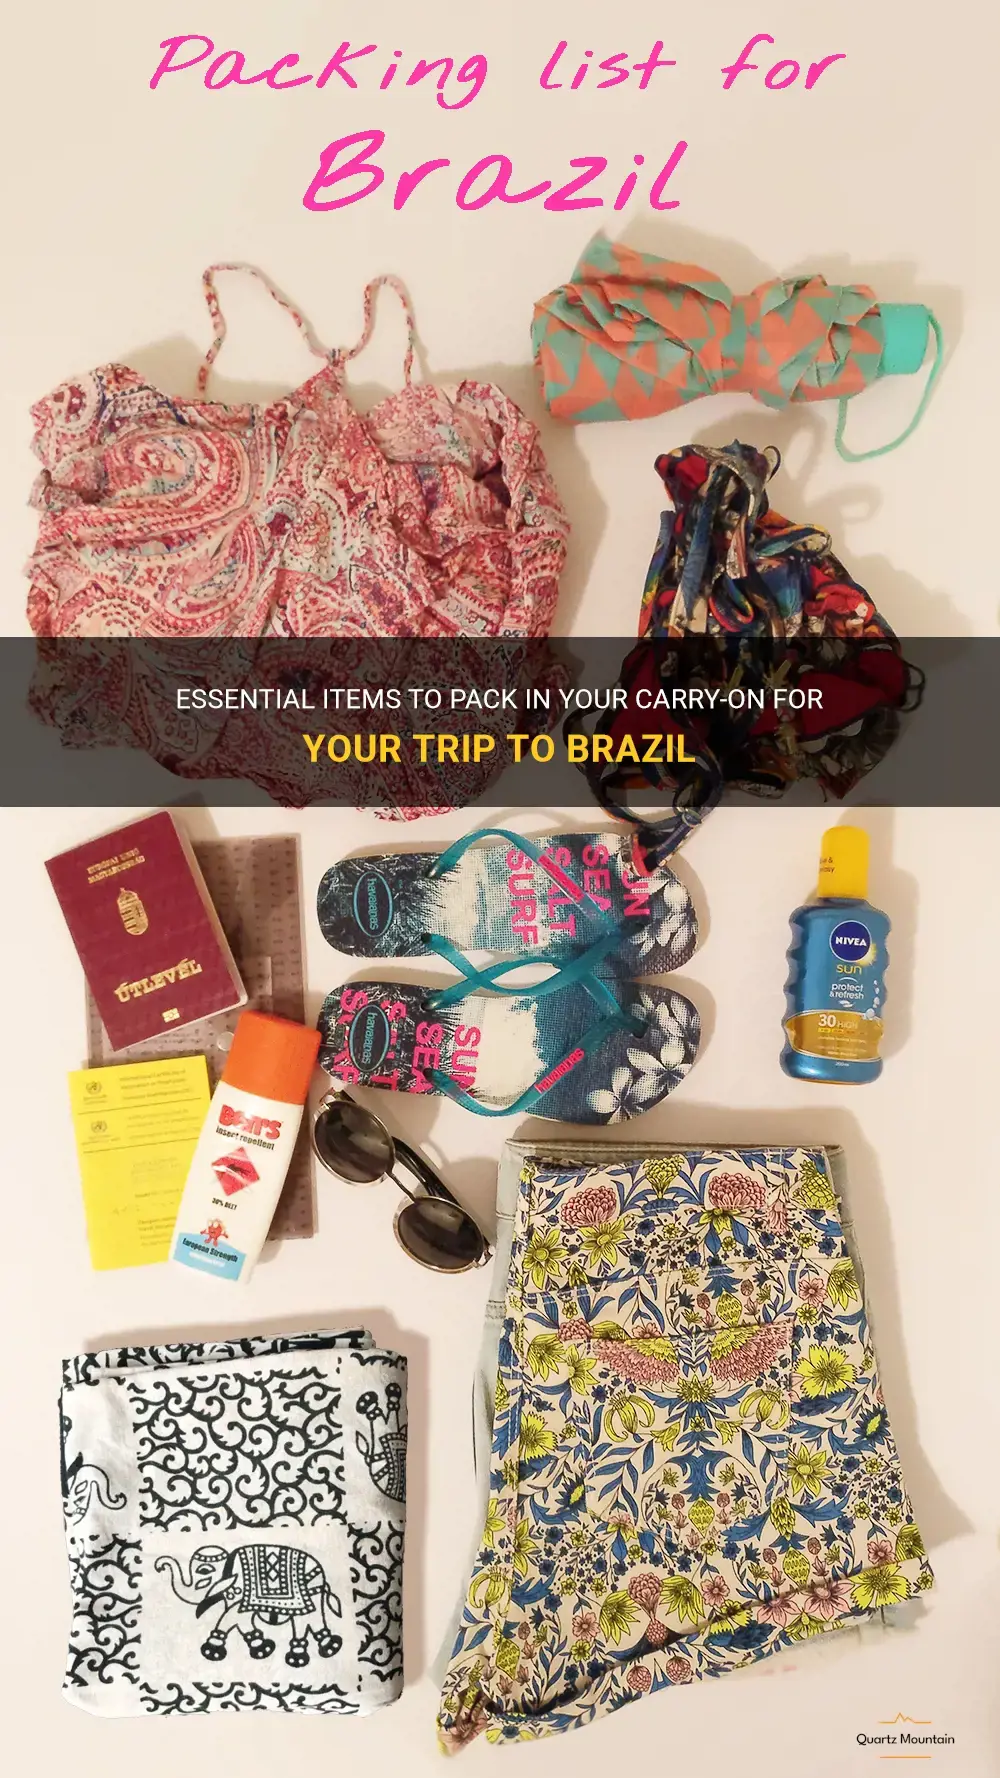 what should I pack in my carry on to brazil